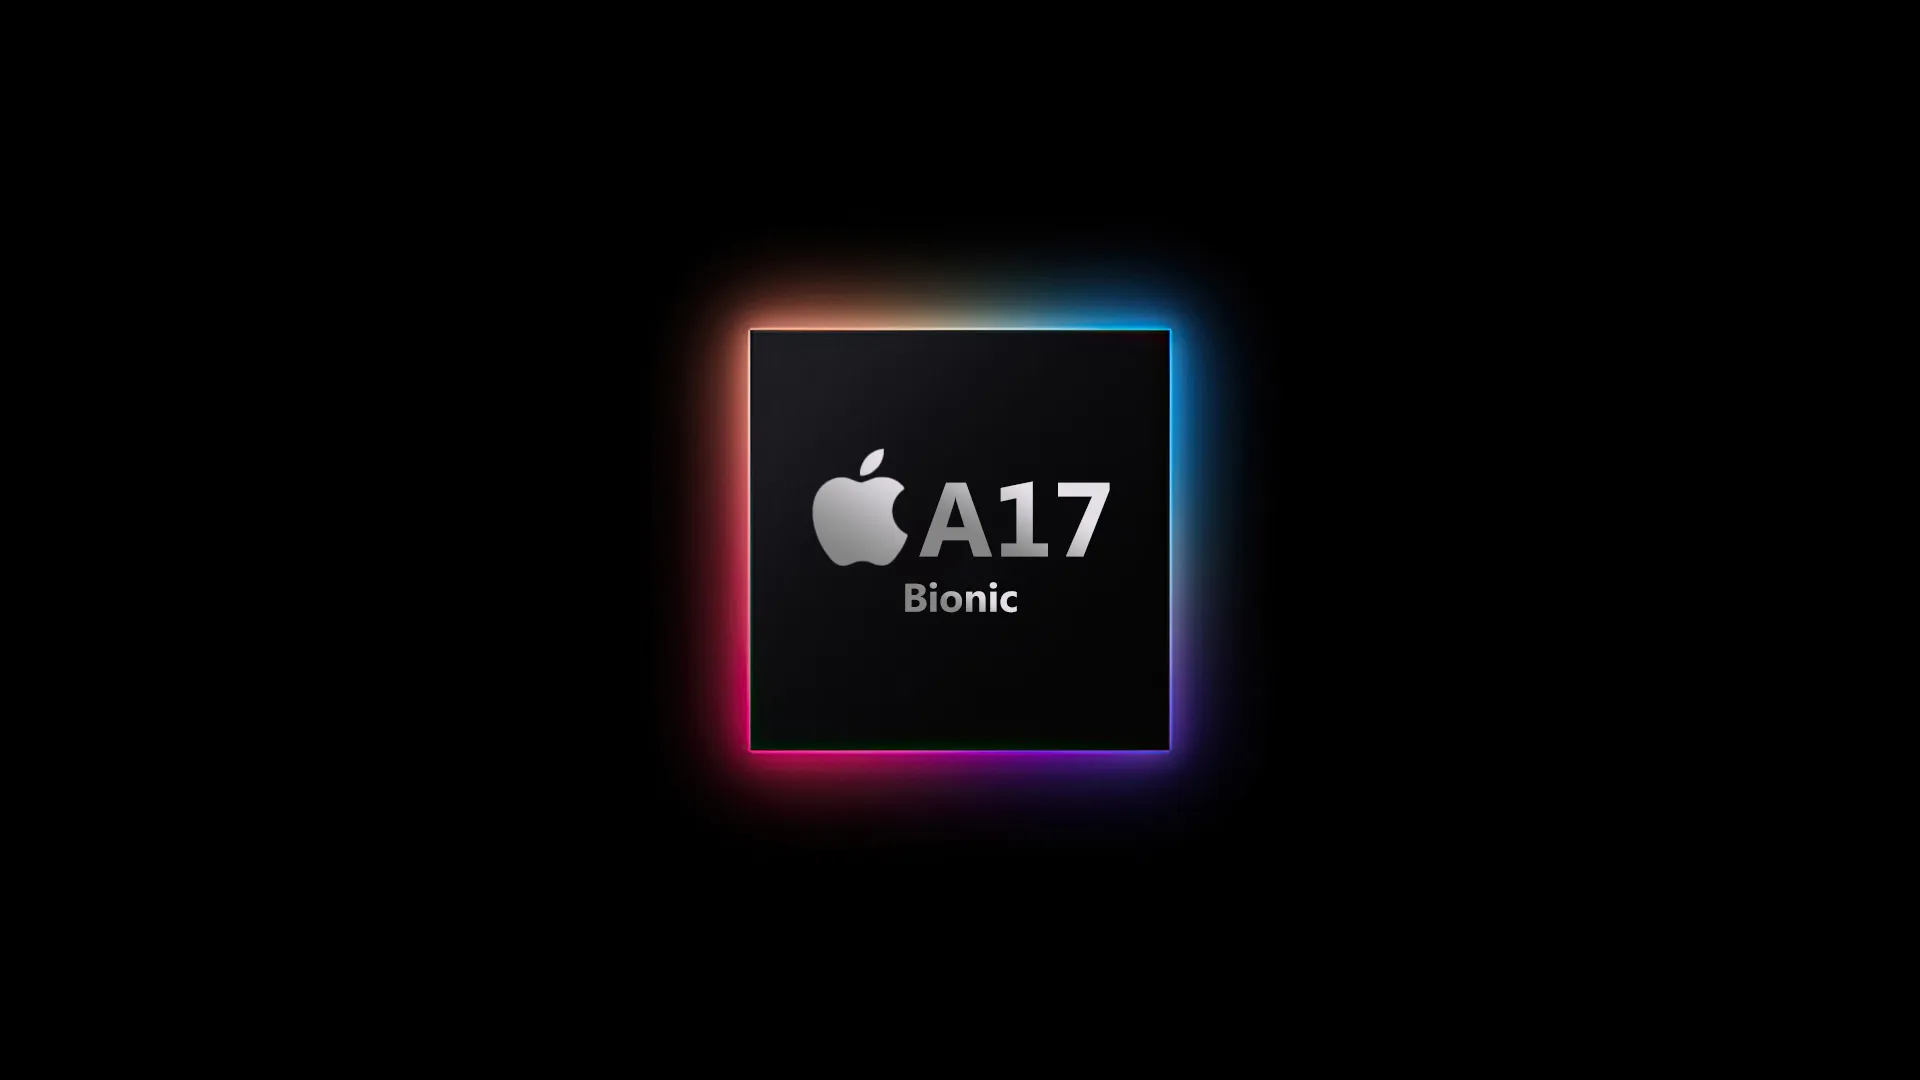 The A17 Pro chip is launched with the iPhone 15 Pro & iPhone 15 Pro Max